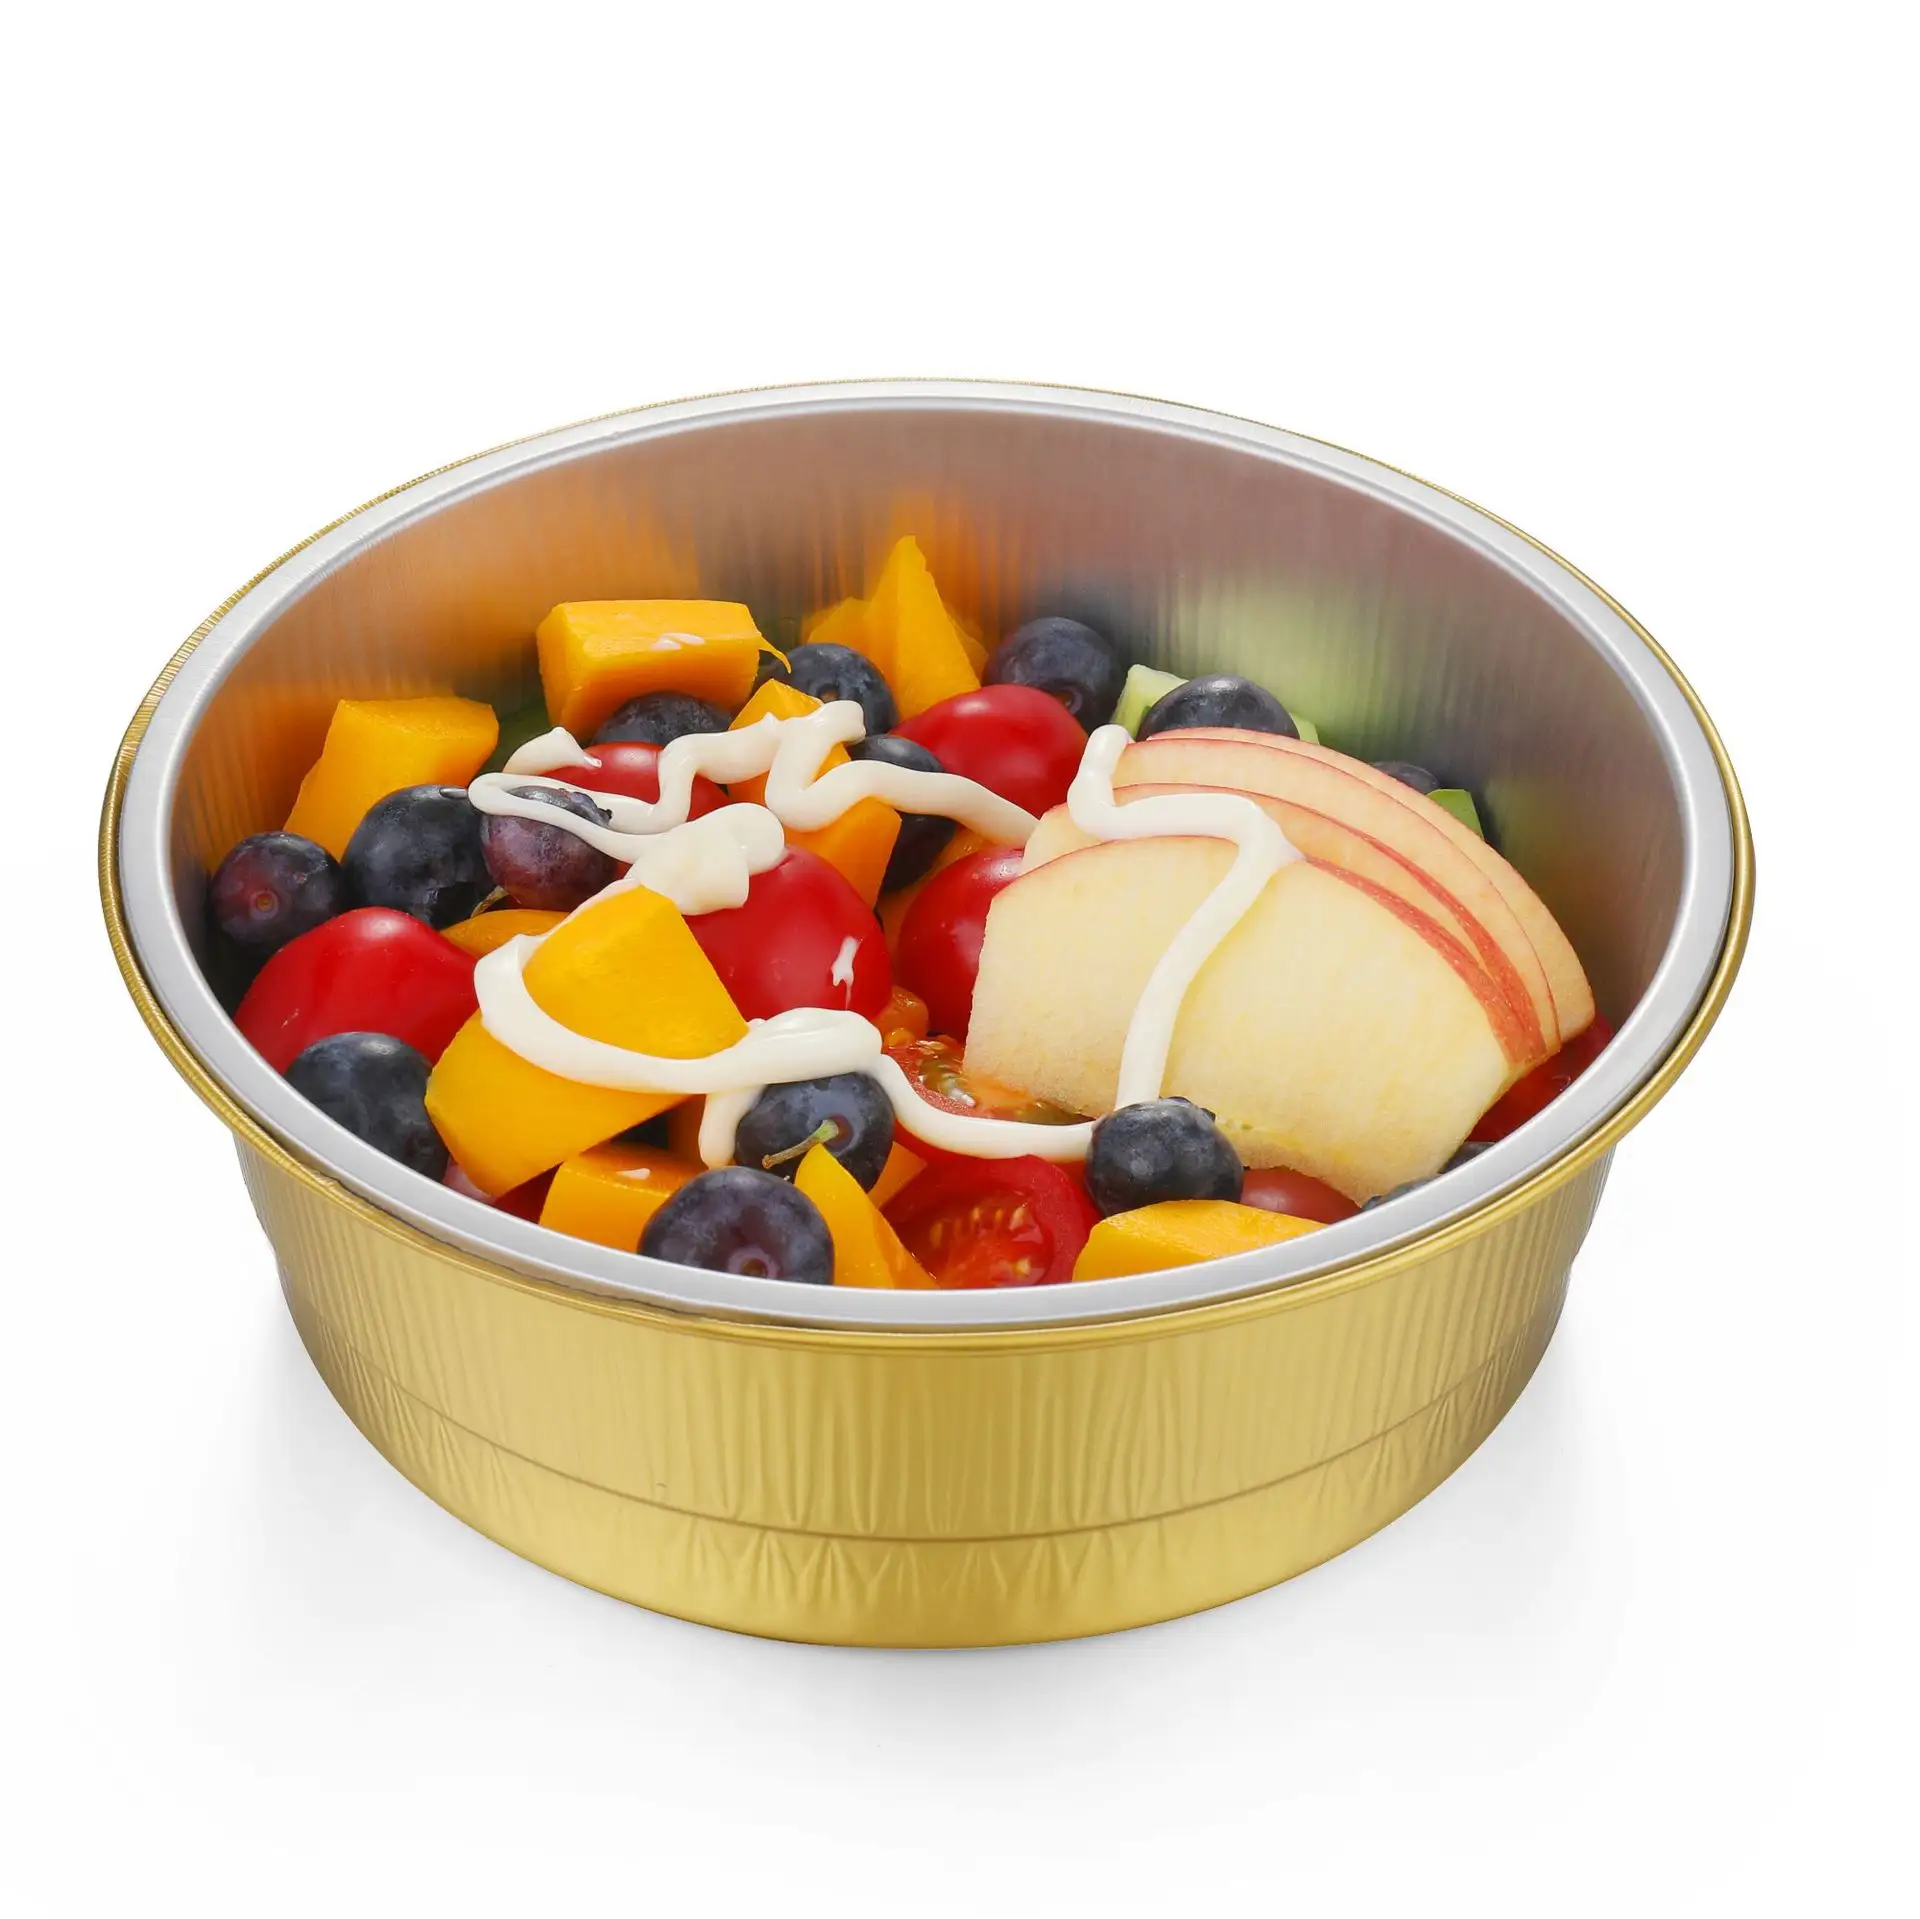 Disposable aluminum foil airline Round container lunch box meal food tray